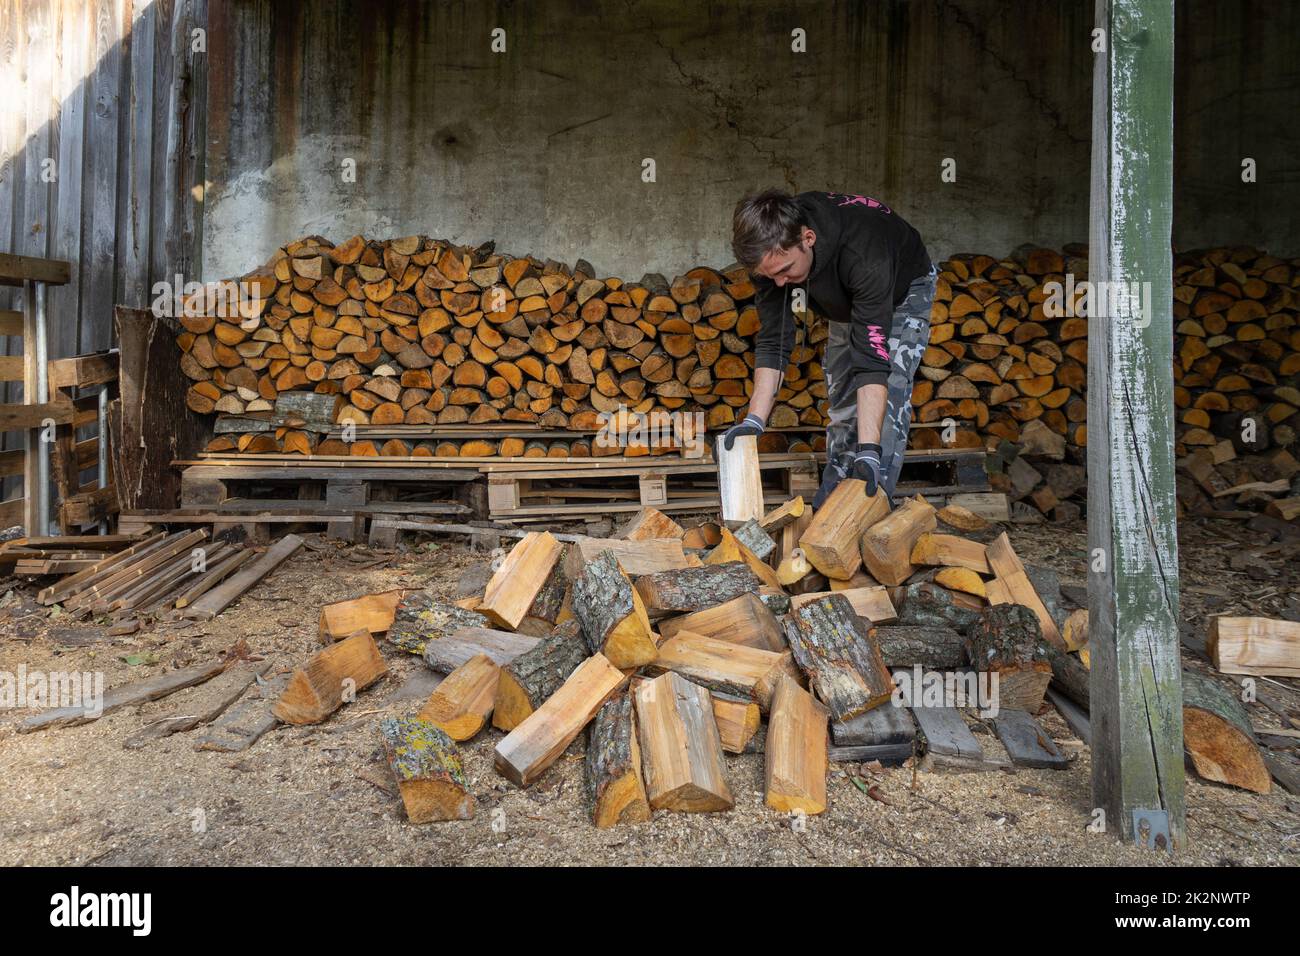 Heating with wood: Building a winter stockpile of firewood Stock Photo